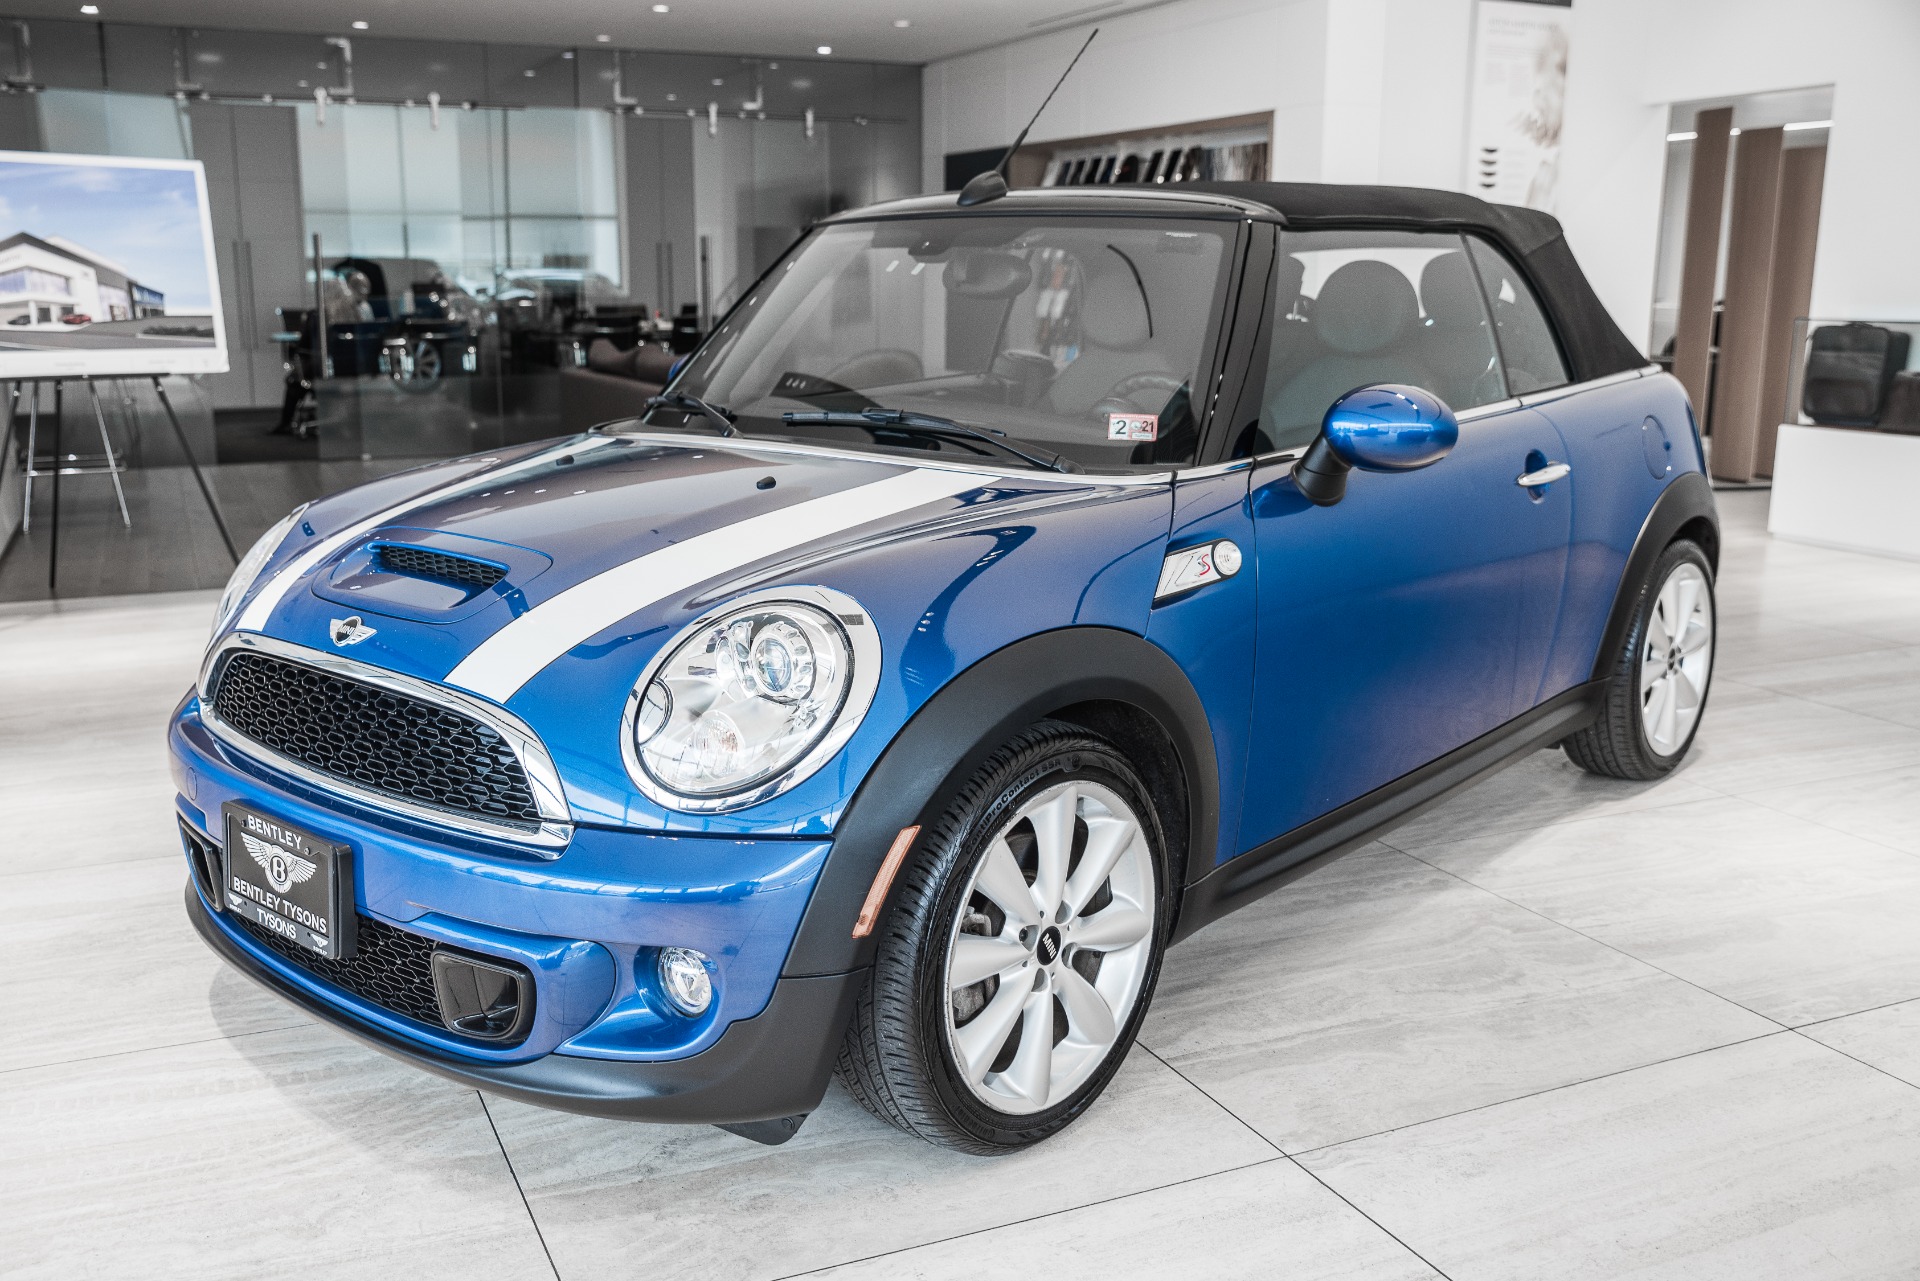 Mini Cooper Convertible For Sale - Photos All Recommendation